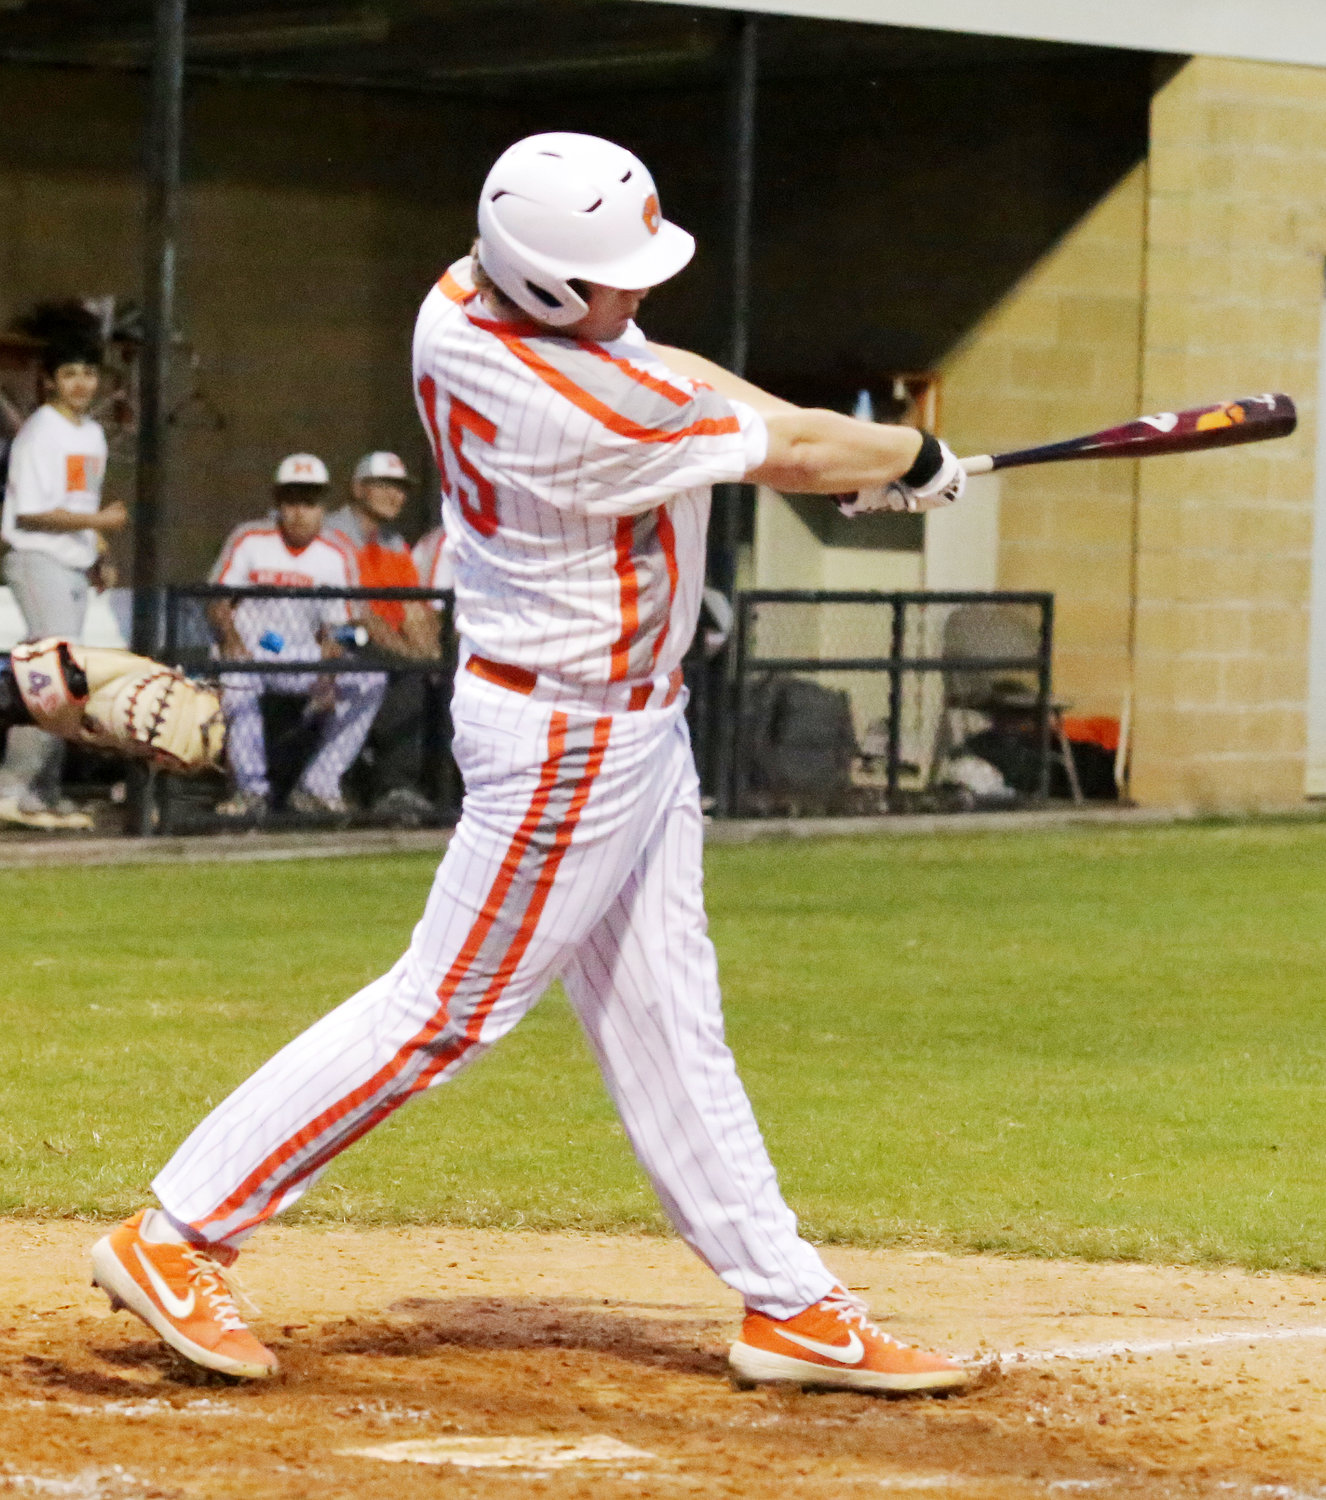 Conner Gibson launches an RBI-double to deep center field in Mineola’s big second-inning rally against Chapel Hill. (Monitor photo by John Arbter)